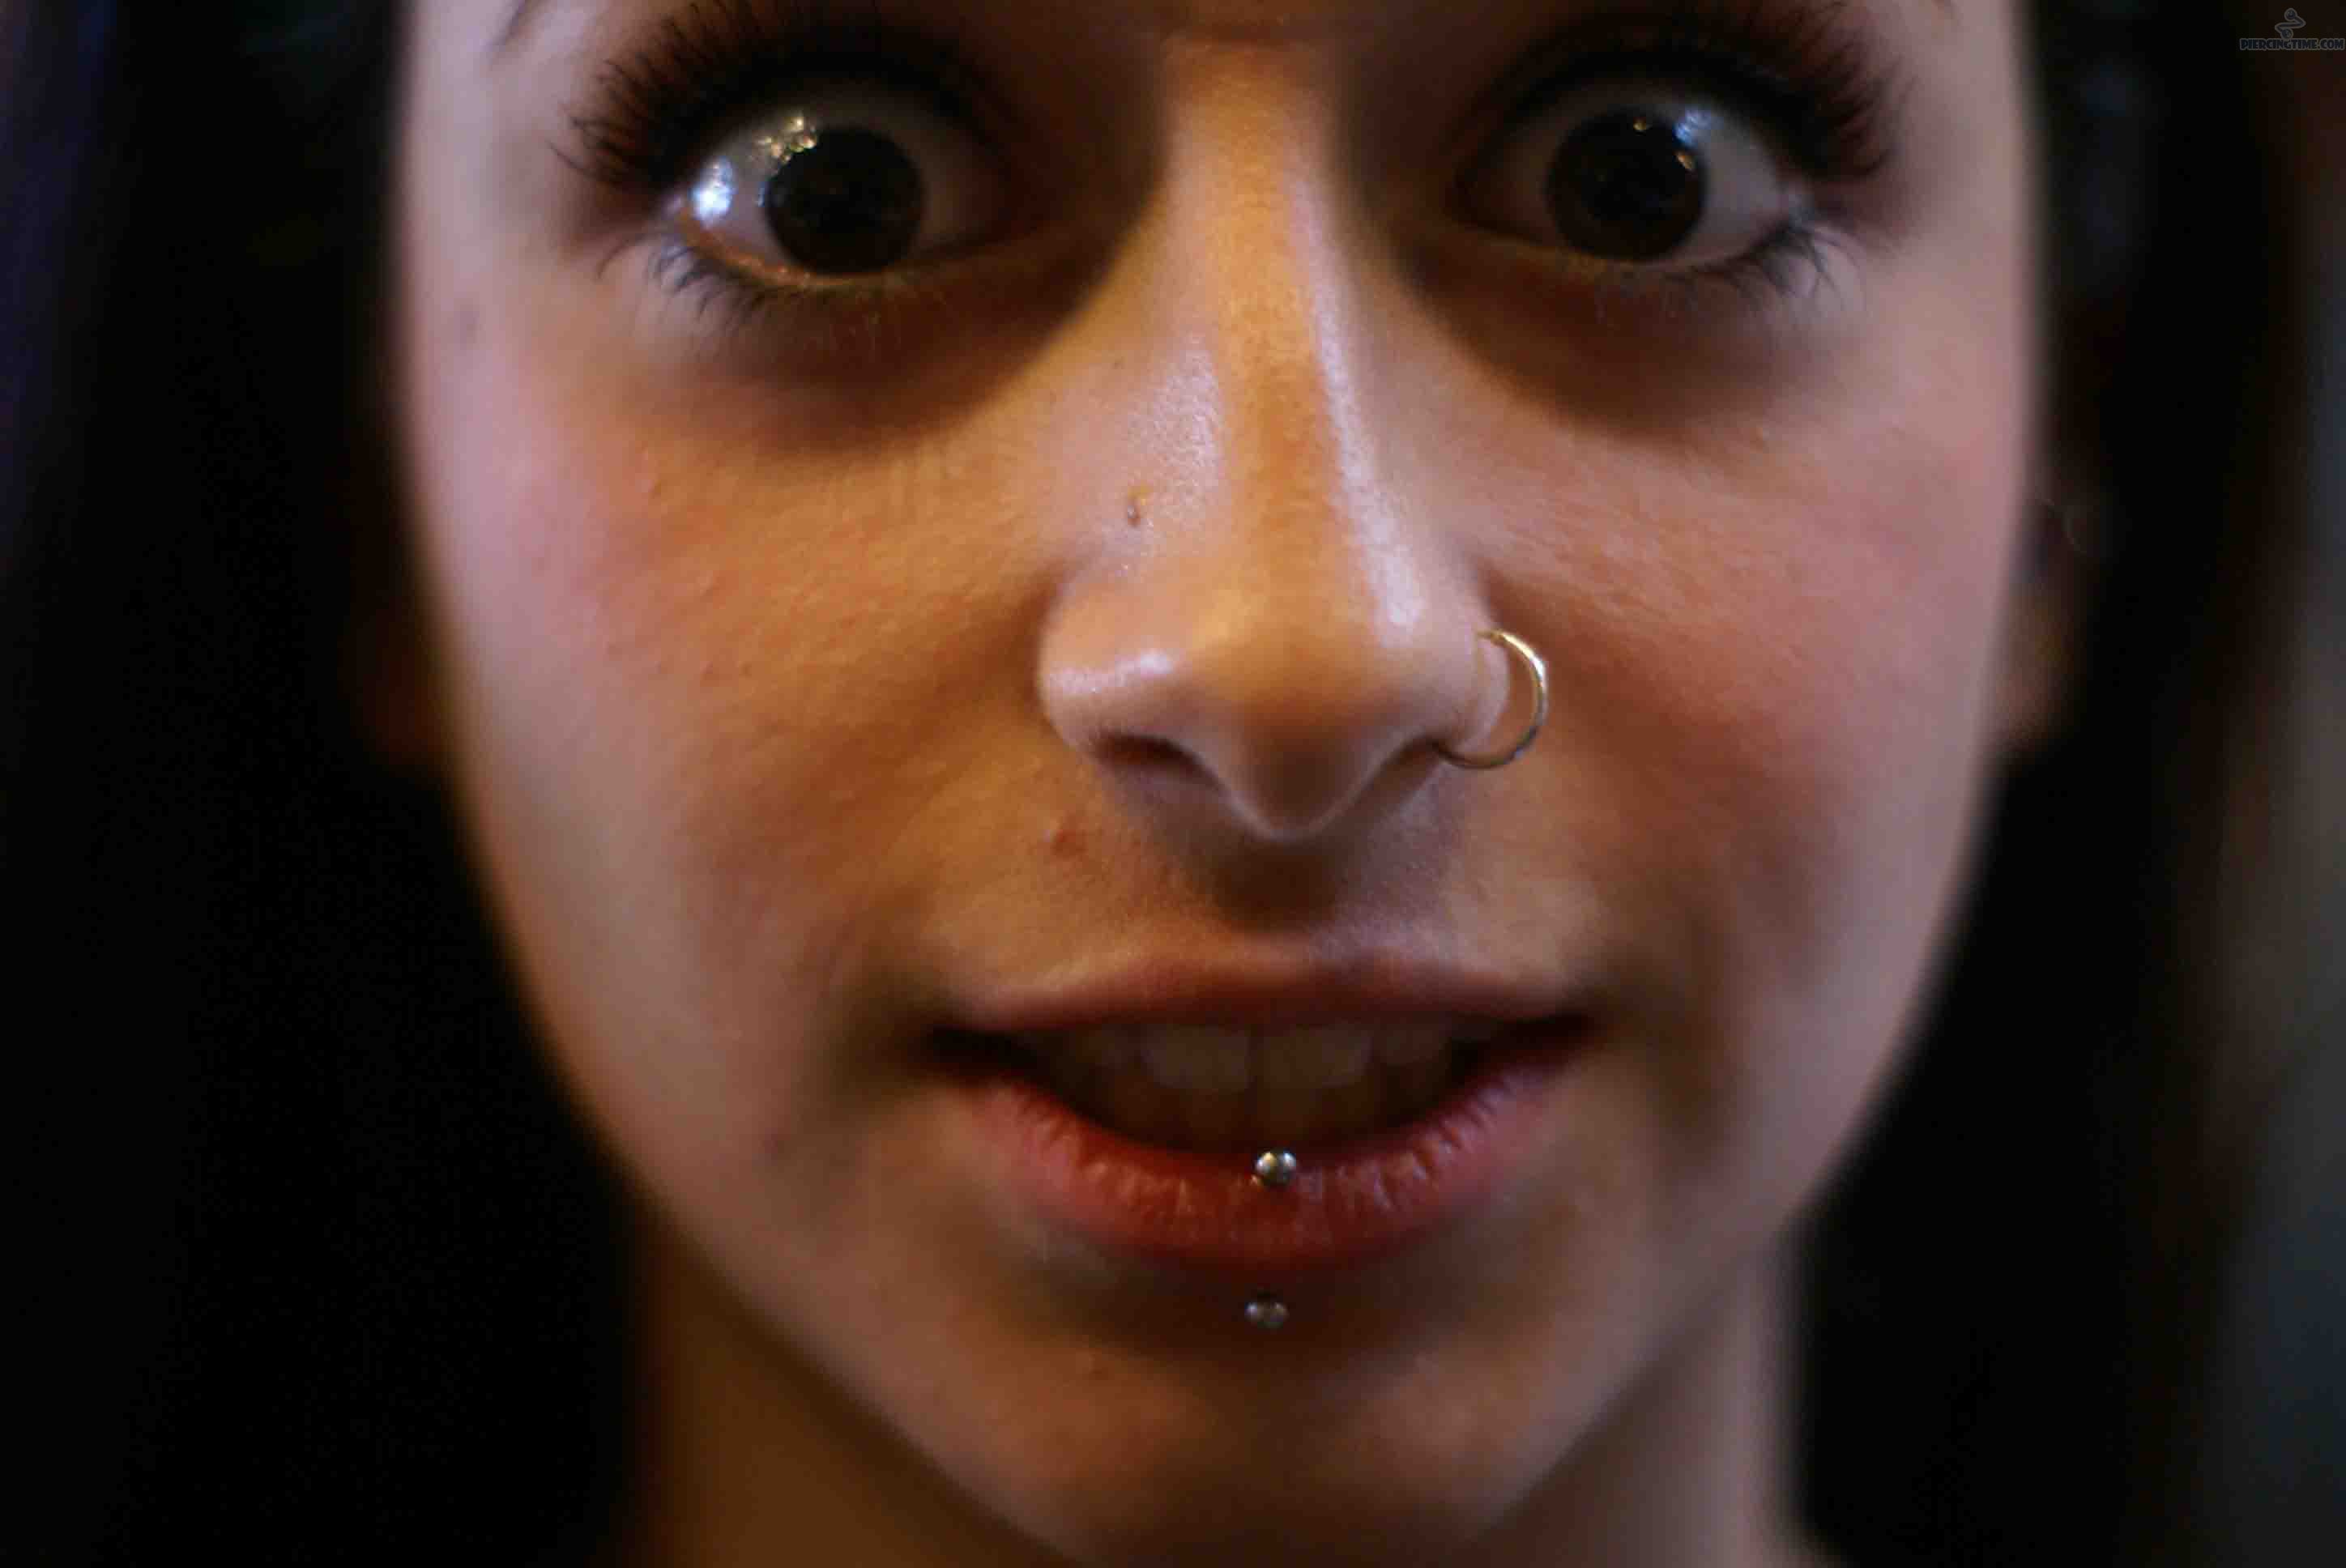 Girl With Left Nostril And Silver Barbell Center Labret Piercing